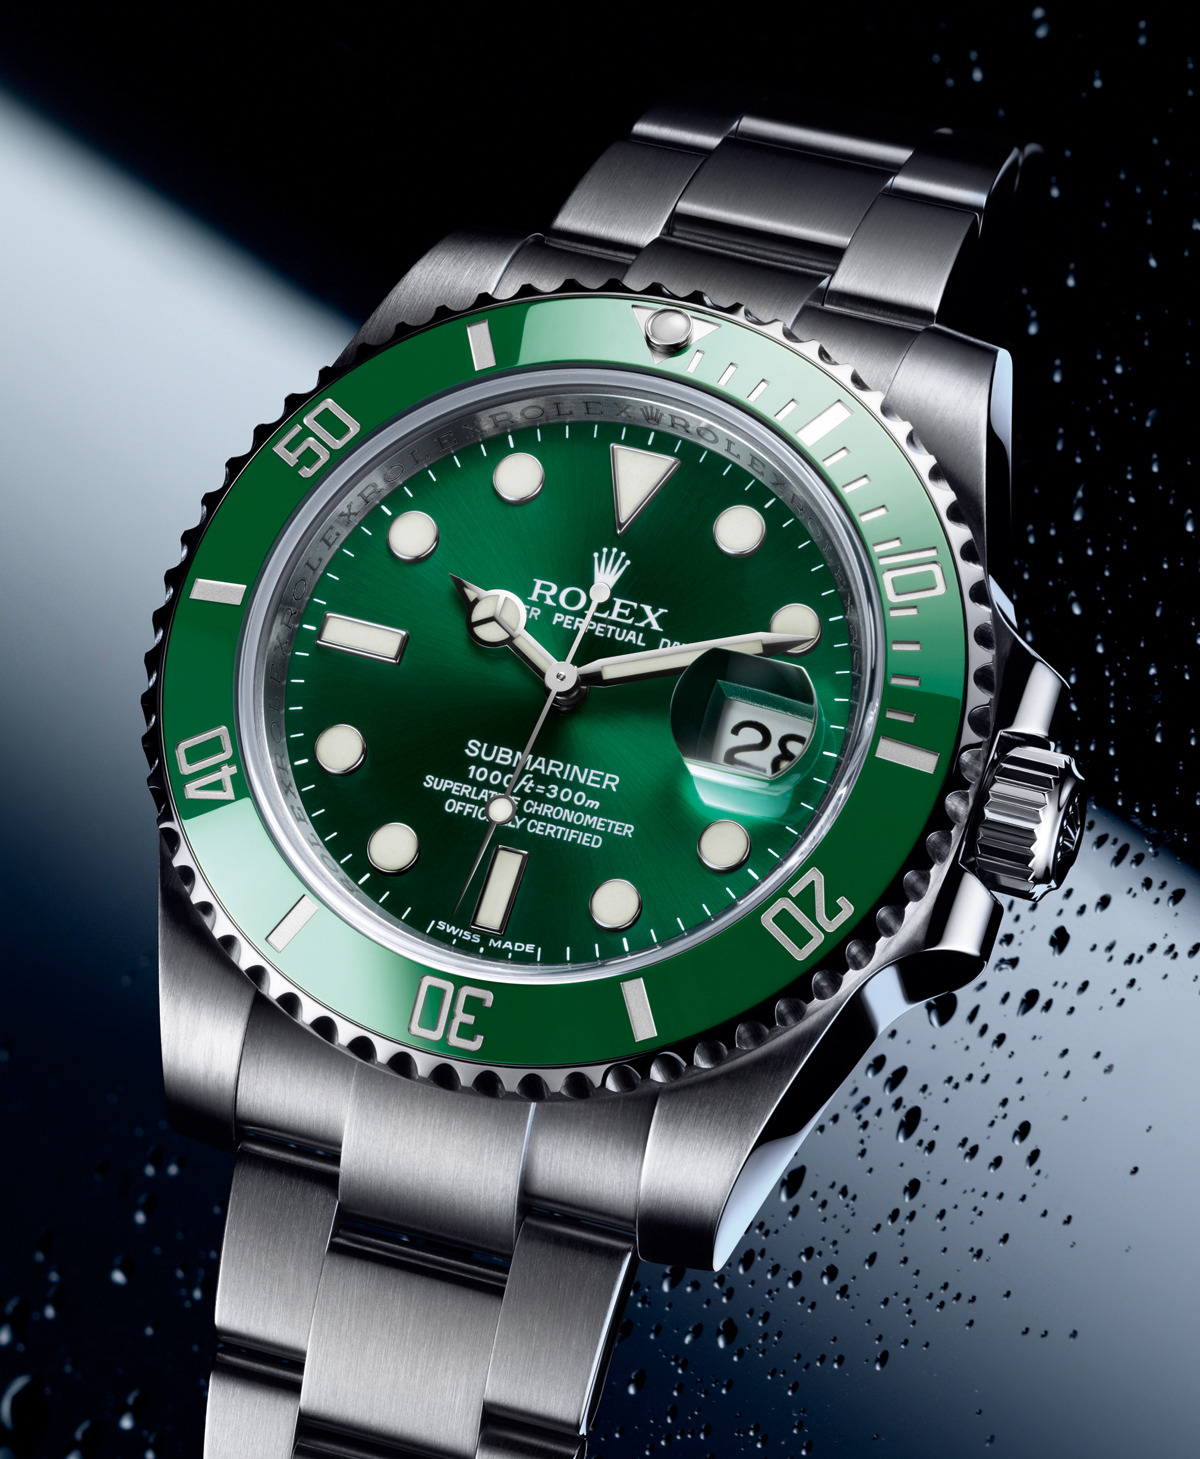 The Oystersteel replica watch has a green dial.